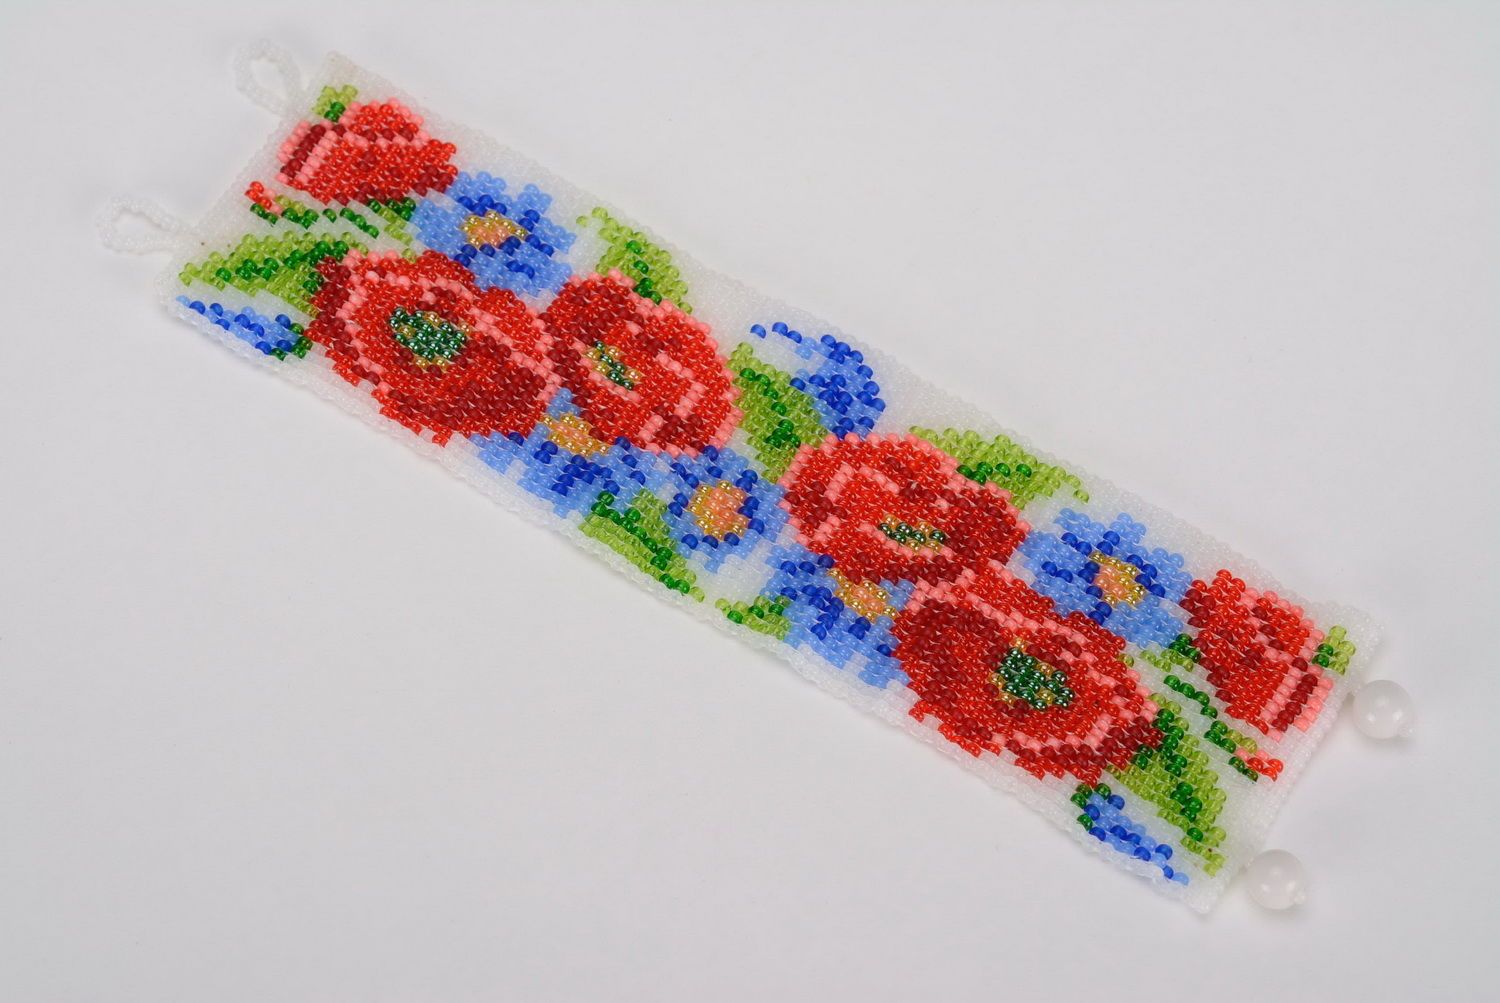 Wide floral beaded wrist bracelet with Poppies for women photo 1